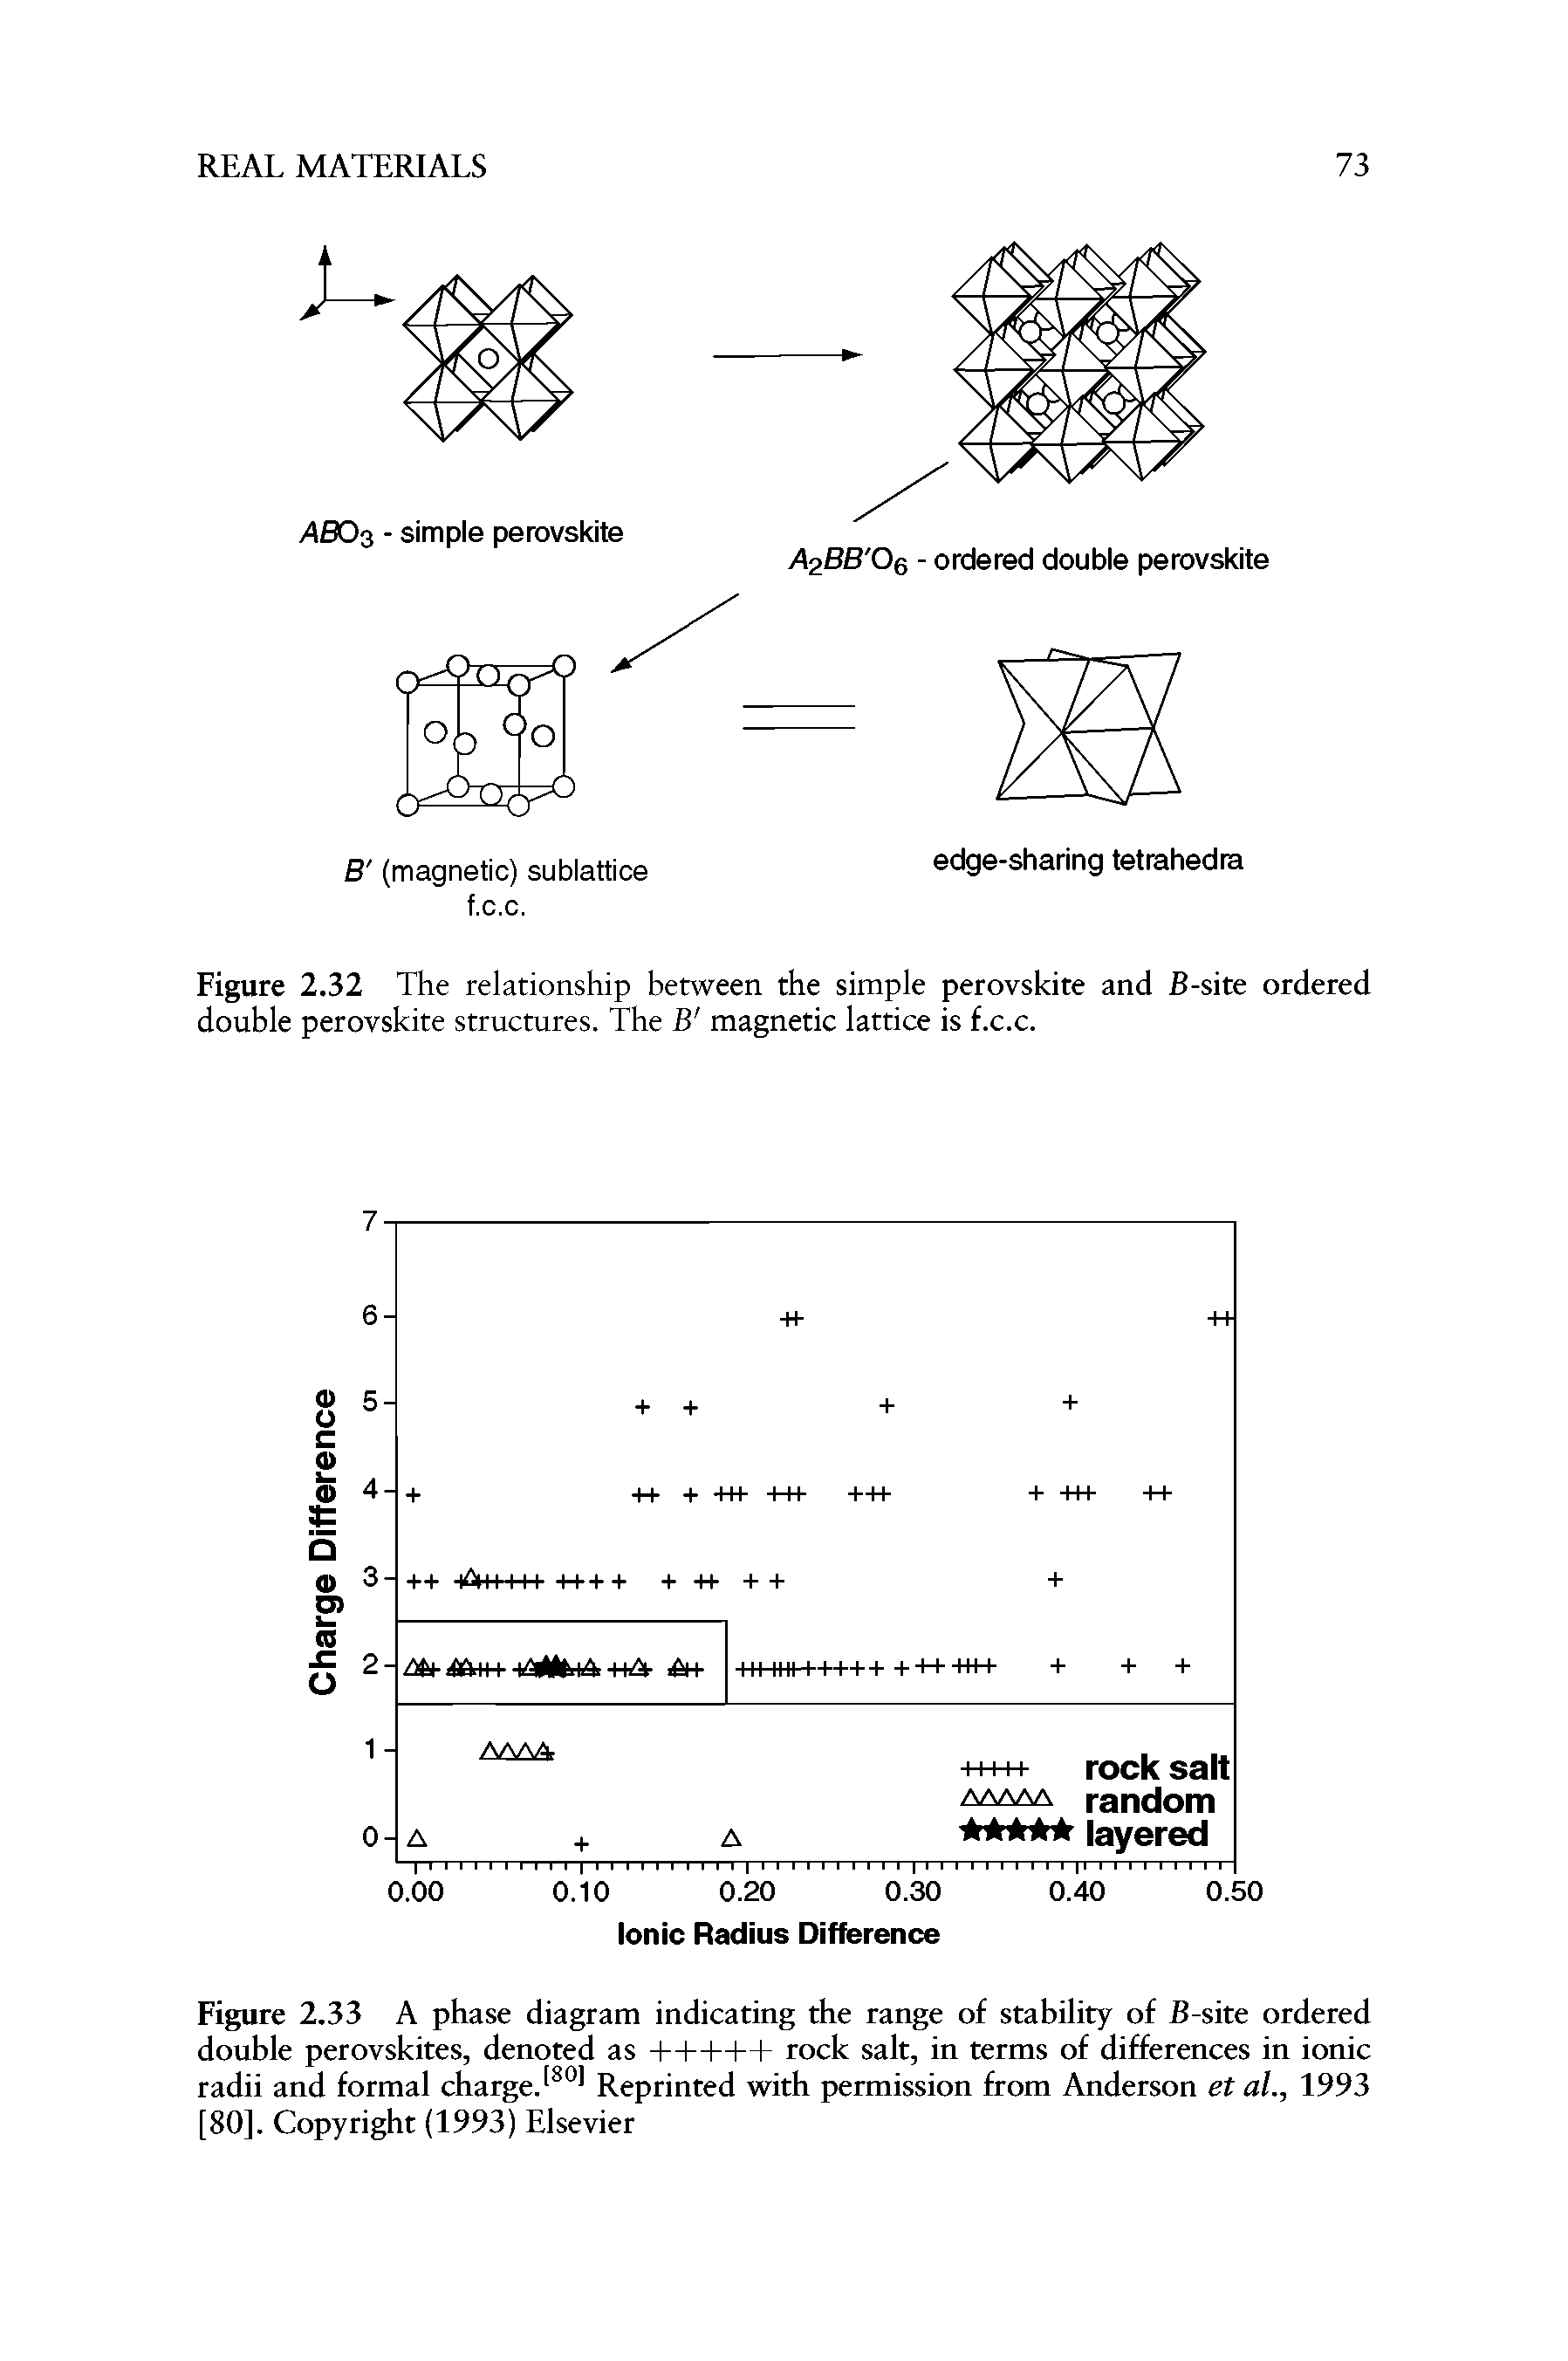 Figure 2.33 A phase diagram indicating the range of stability of B-site ordered double perovskites, denoted as -I—I—I—I—I- rock salt, in terms of differences in ionic radii and formal charge. Reprinted with permission from Anderson eta/., 1993 [80], Copyright (1993) Elsevier...